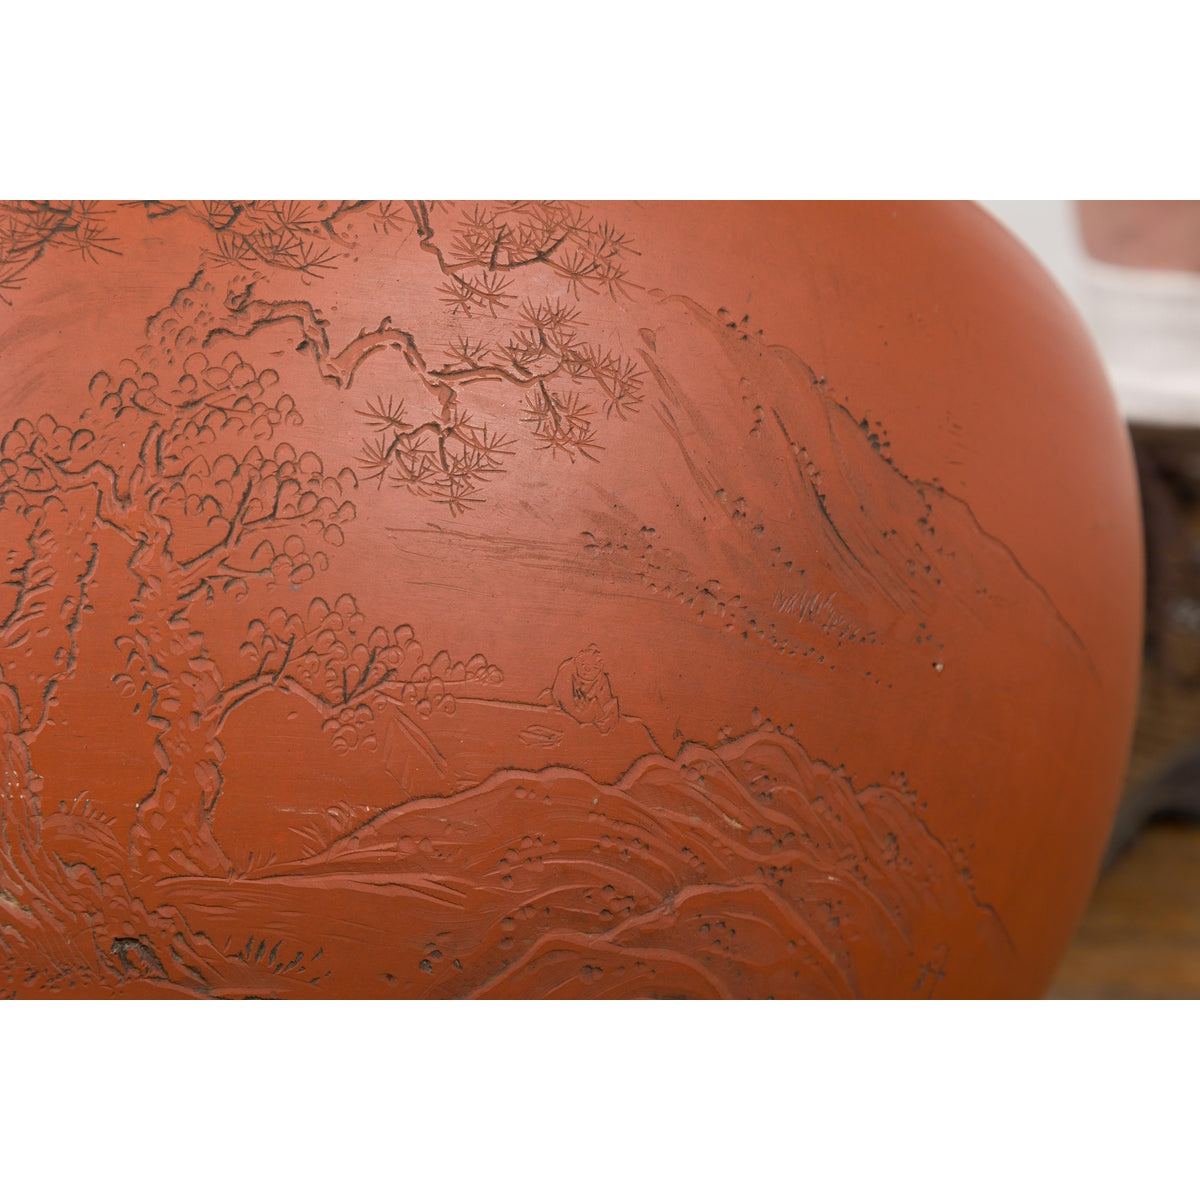 Orange Circular Antique Planter with Etched Design-YN7819-17. Asian & Chinese Furniture, Art, Antiques, Vintage Home Décor for sale at FEA Home